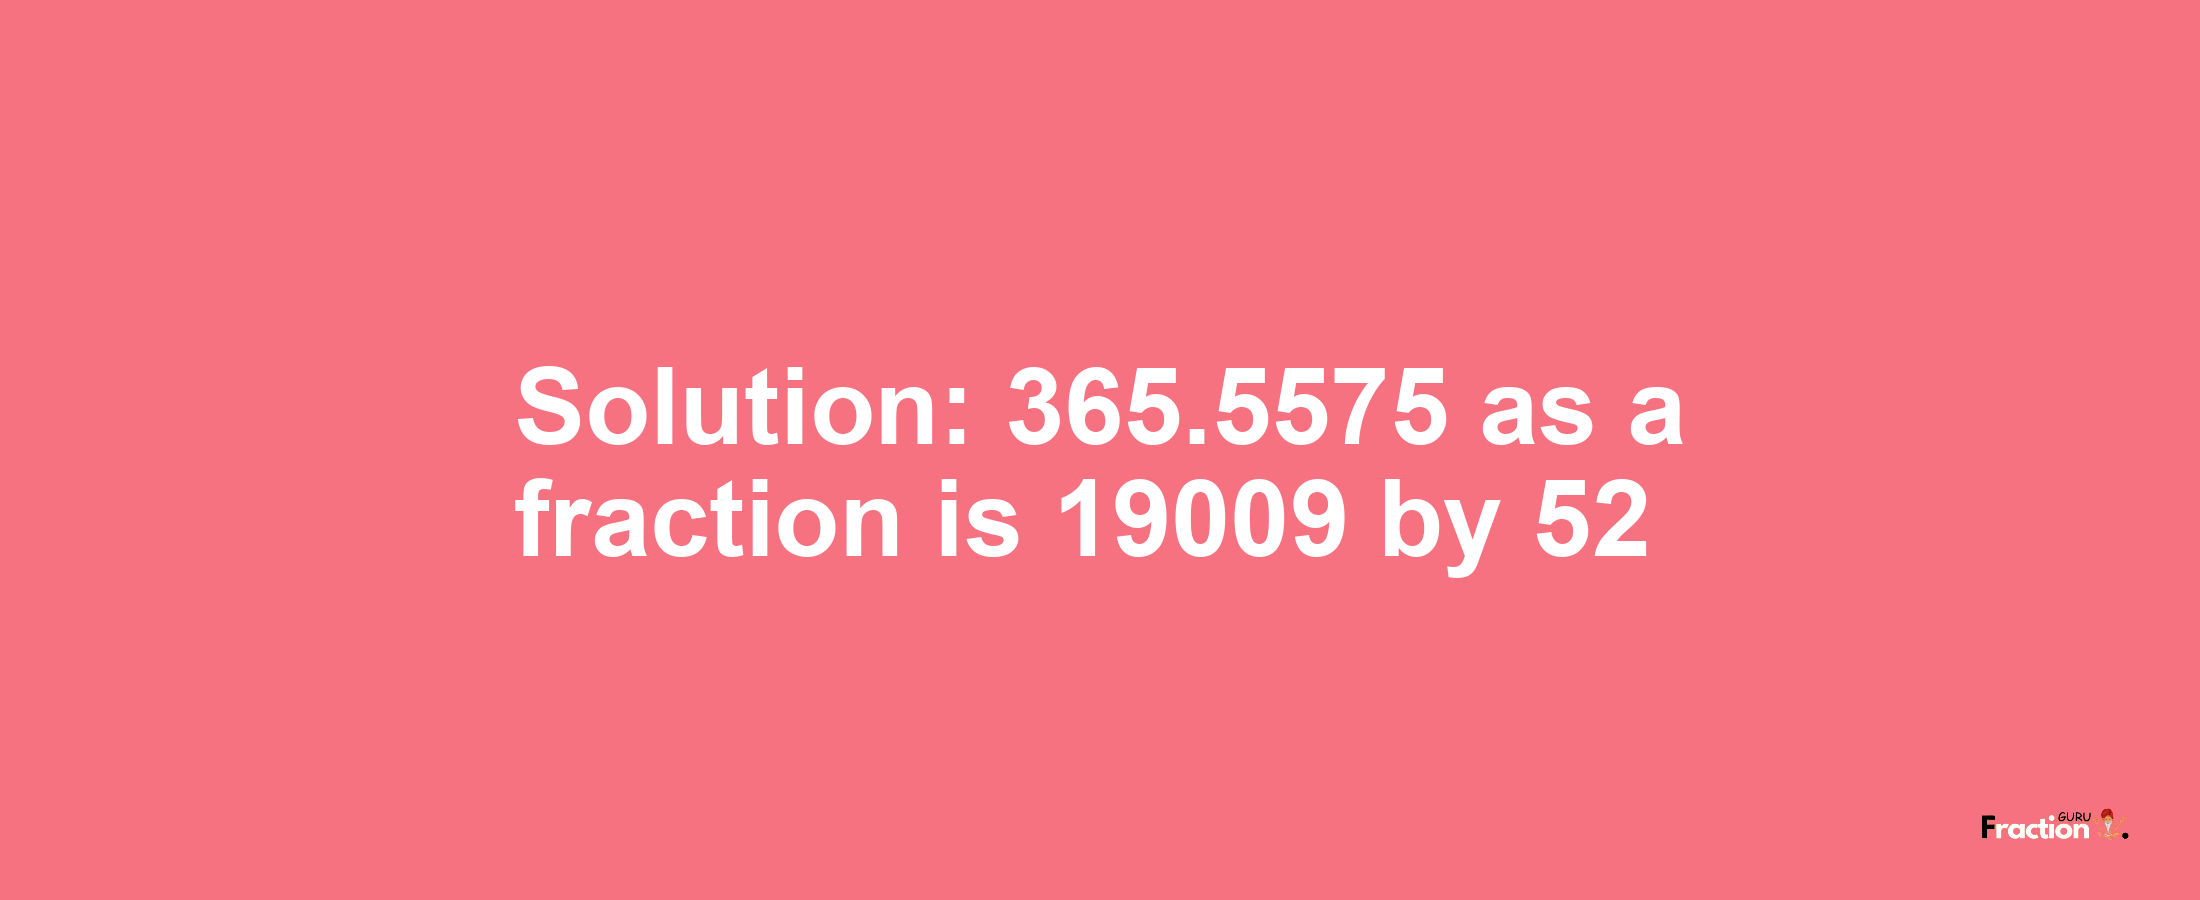 Solution:365.5575 as a fraction is 19009/52